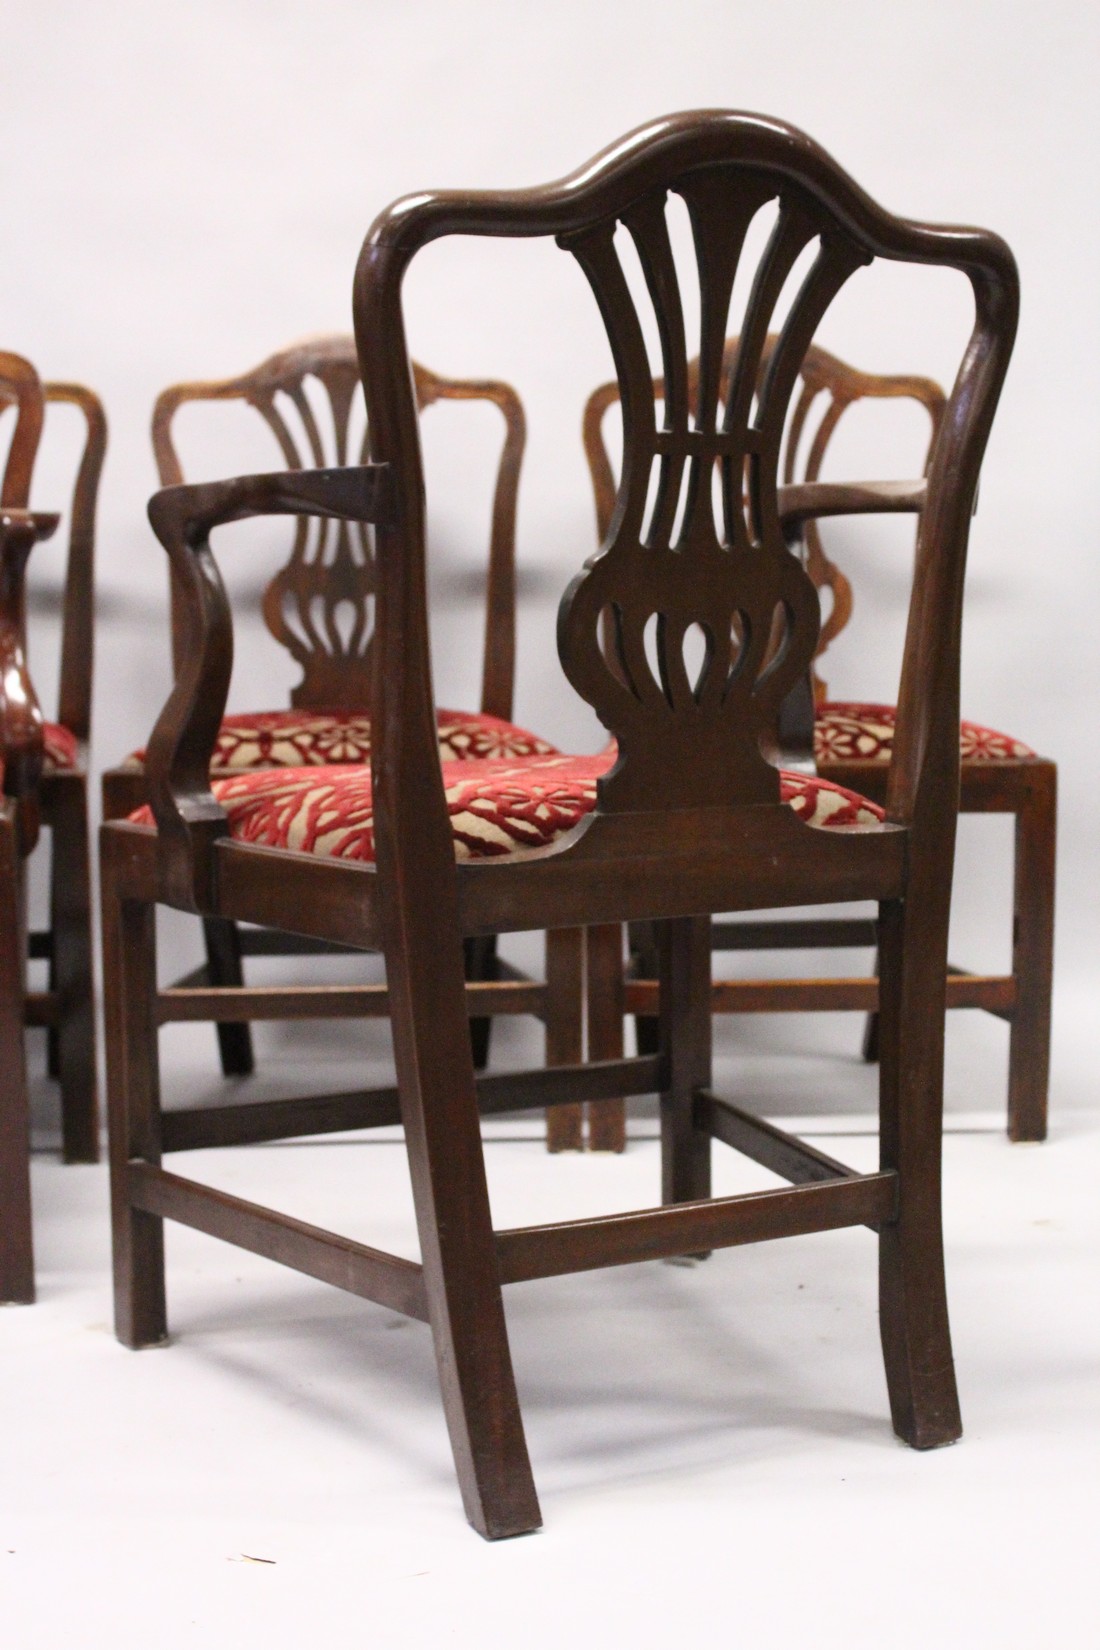 A VERY GOOD SET OF EIGHT HEPPLEWHITE MAHOGANY DINING CHAIRS, two with arms, with pierced vase - Image 4 of 4